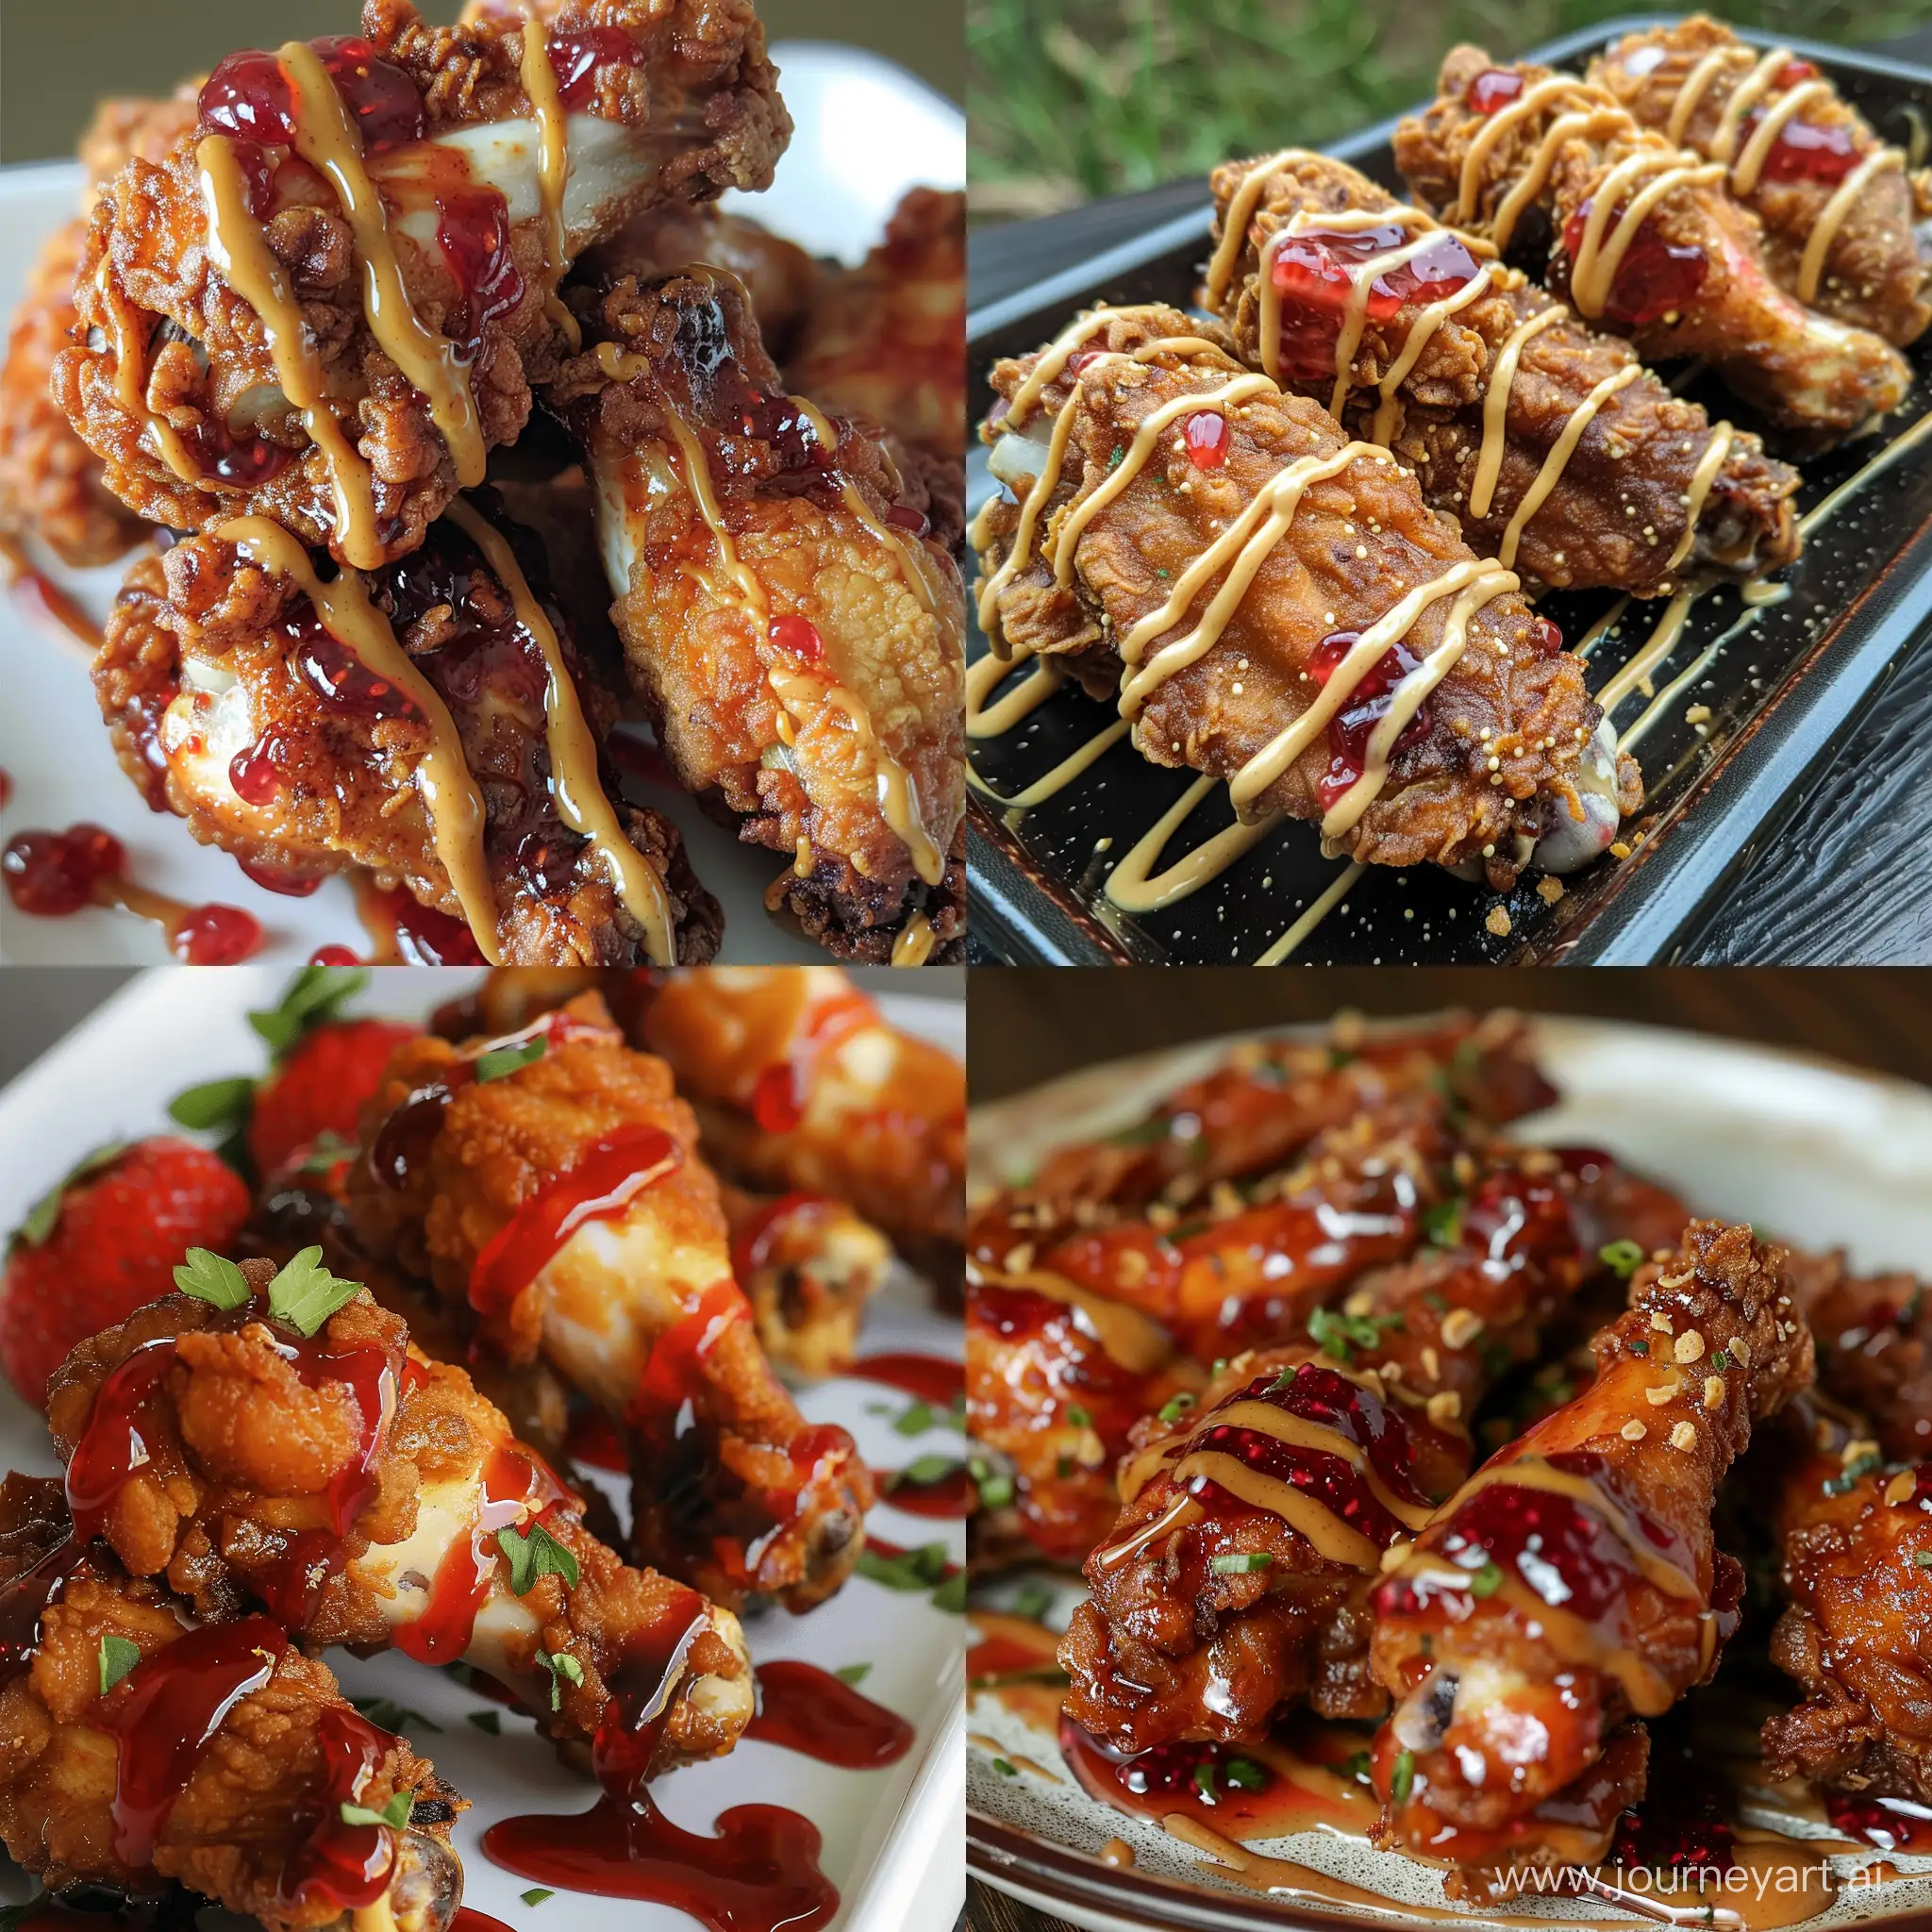 Savory-and-Sweet-Fusion-Chicken-Wings-in-Strawberry-Jelly-and-Peanut-Butter-Sauce